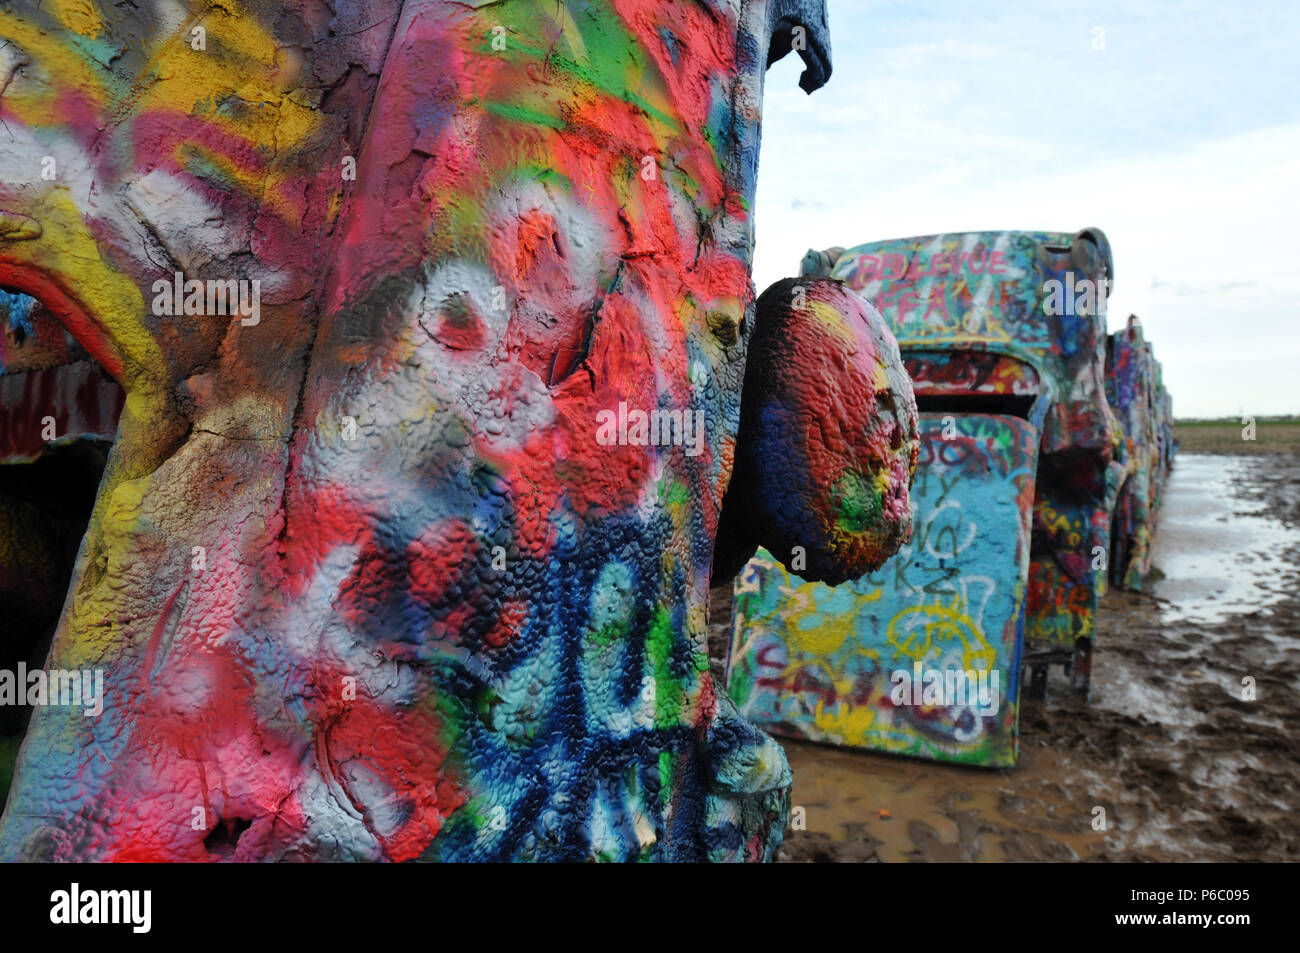 Detail of a spray-painted car at Cadillac Ranch, a public art installation on Route 66 in Amarillo, Texas, created in 1974 by the collective Ant Farm. Stock Photo